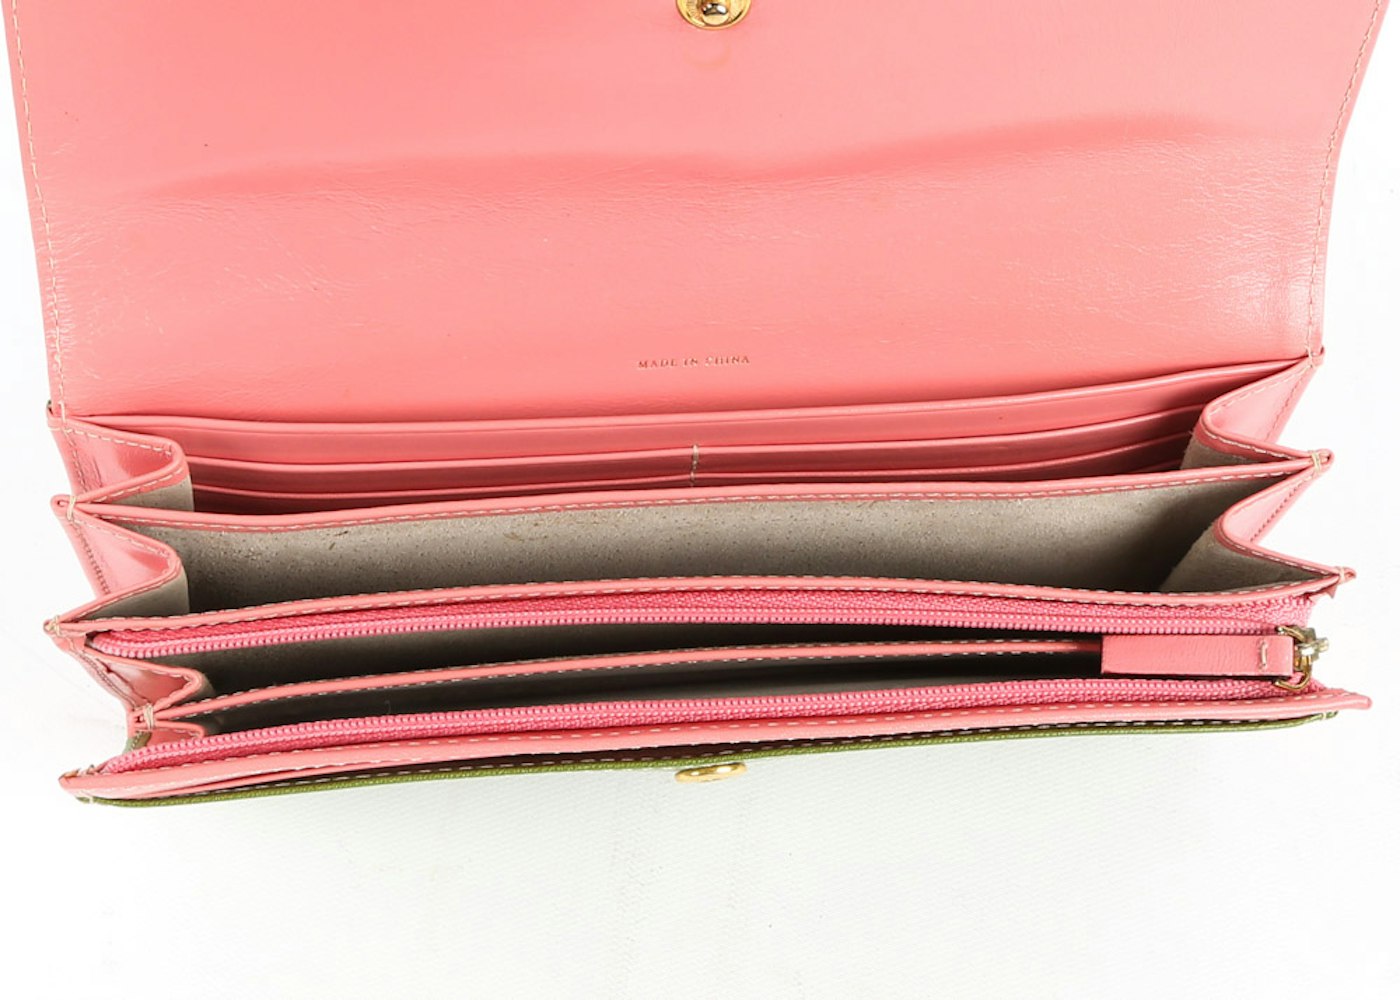 Kate Spade New York Avocado Green and Blush Pink Leather Wallet | EBTH